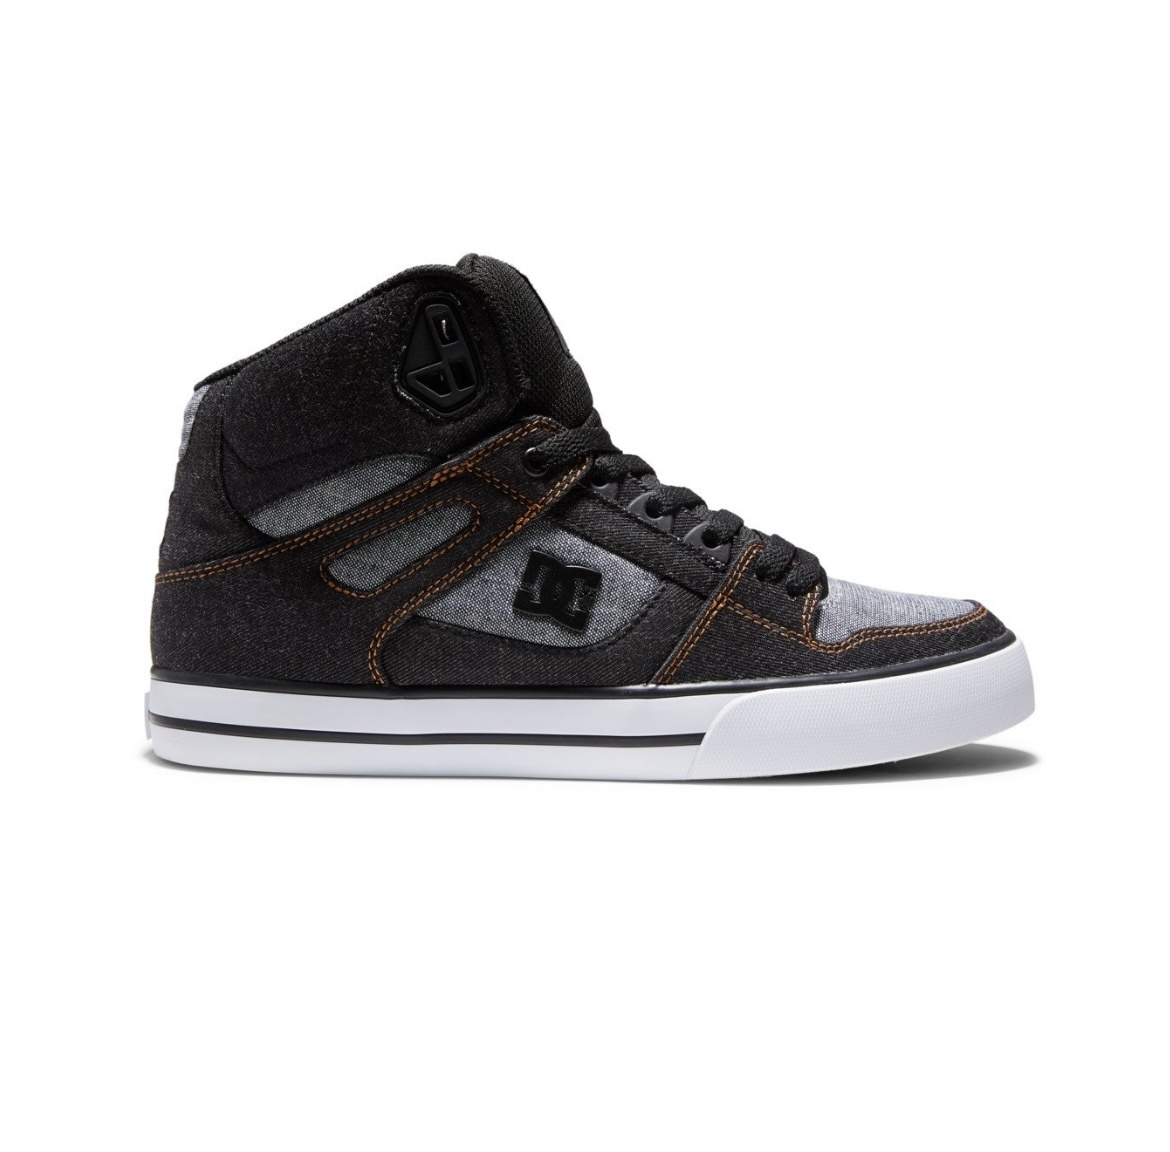 DC Pure High Top WC Skate Shoes - Black/Battleship/Armour - Supereight